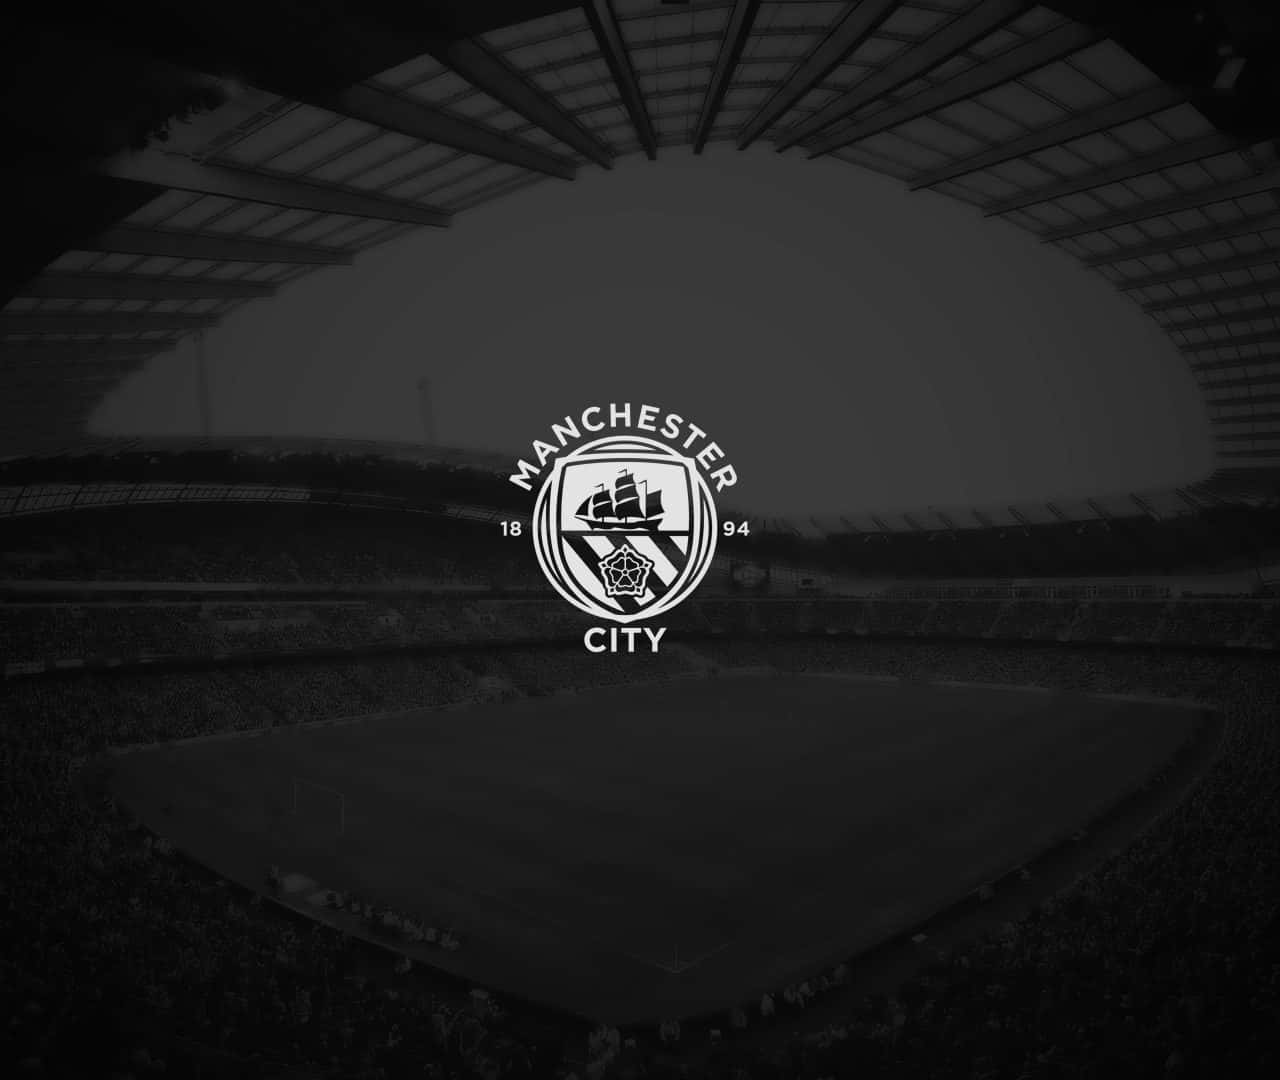 Support the blues with the Manchester City Iphone Wallpaper